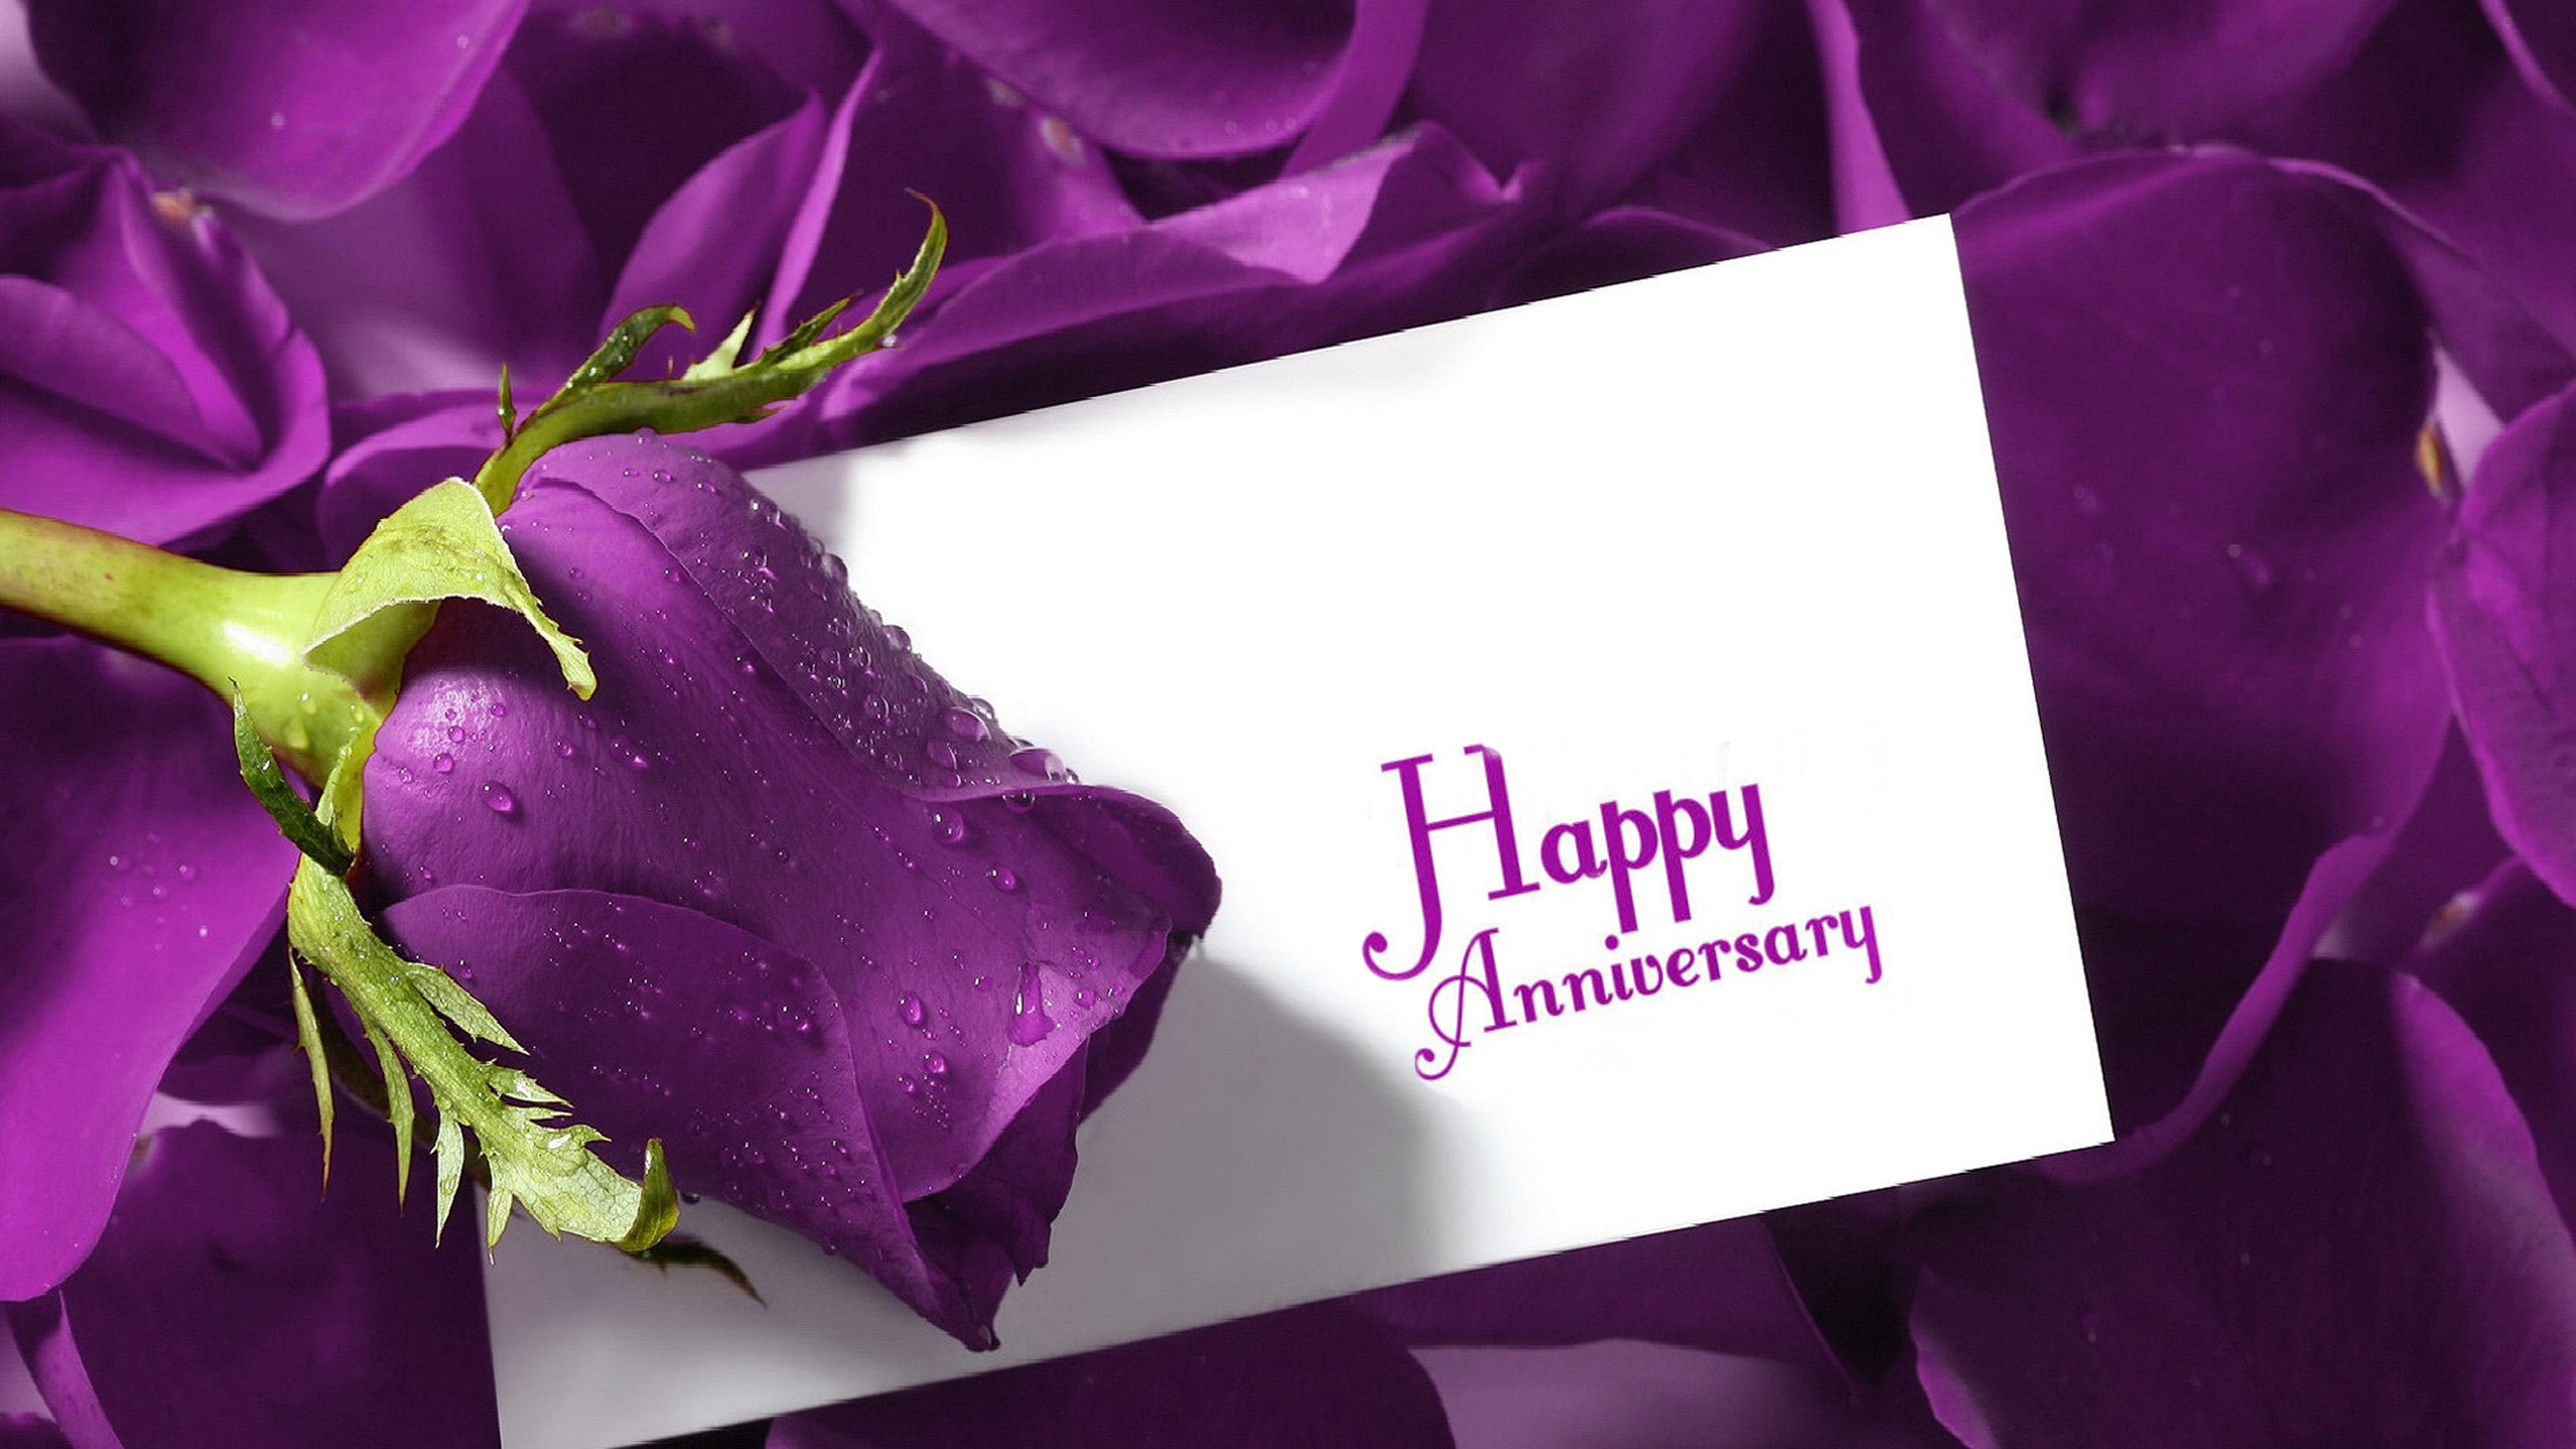 Free Download Anniversary Background Download 2600x1463 For Your Desktop Mobile Tablet Explore 76 Happy Anniversary Wallpapers Christian Happy Anniversary Wallpaper Images Wedding Anniversary Wallpaper